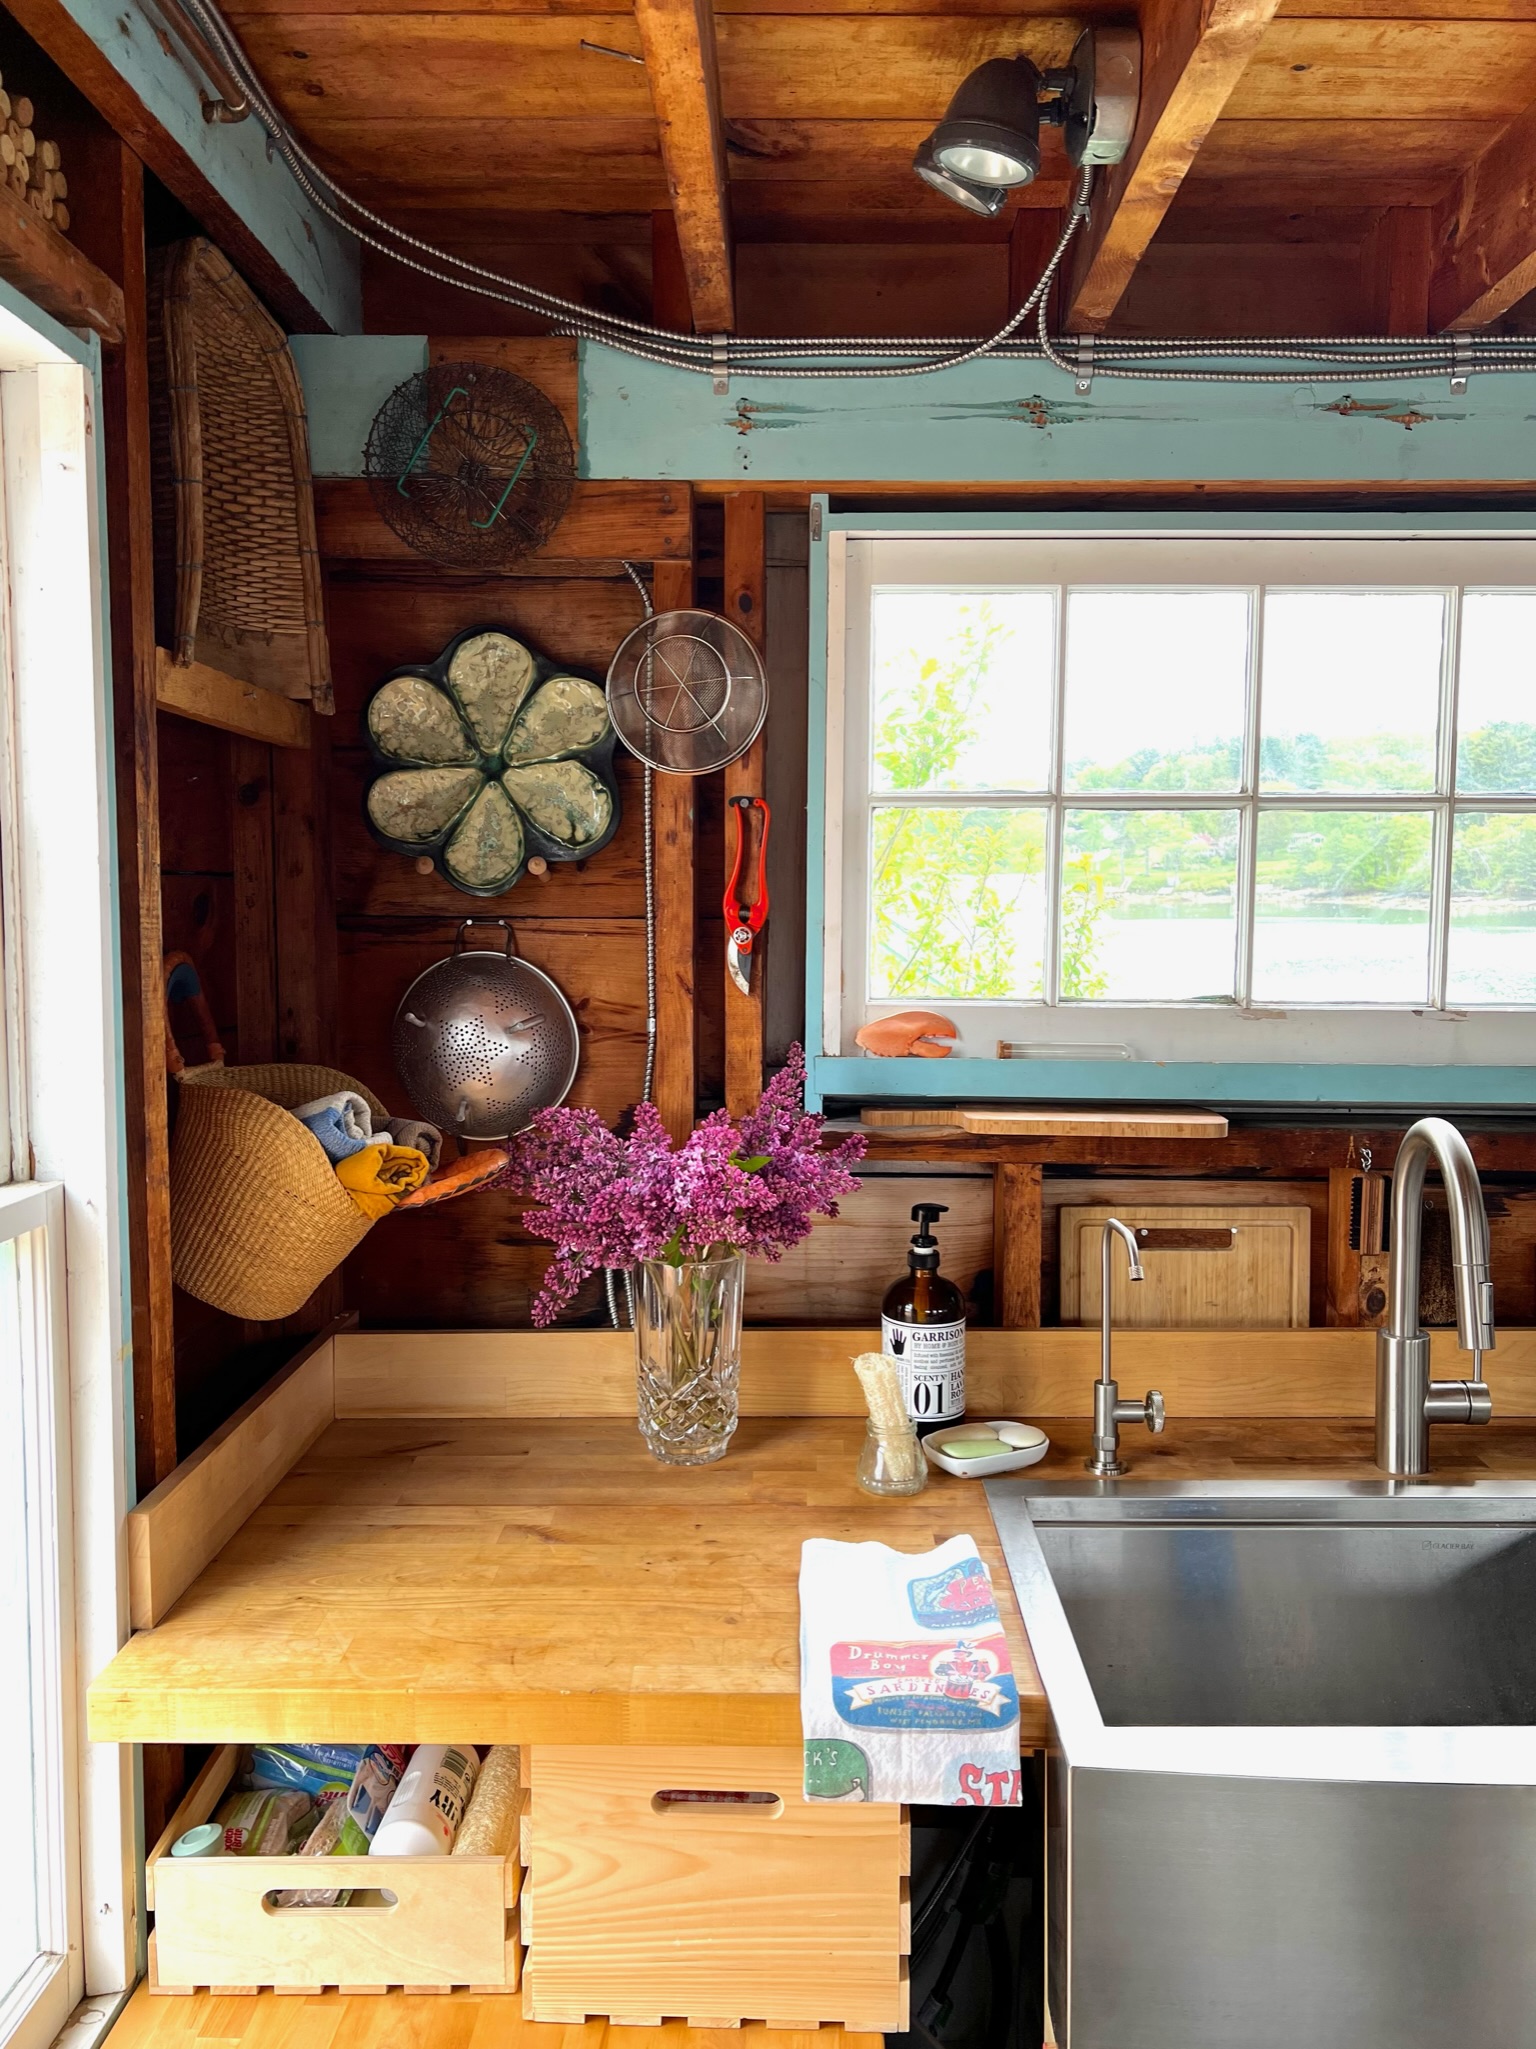 Lili and Blake's Summer Kitchen in Harpswell, ME